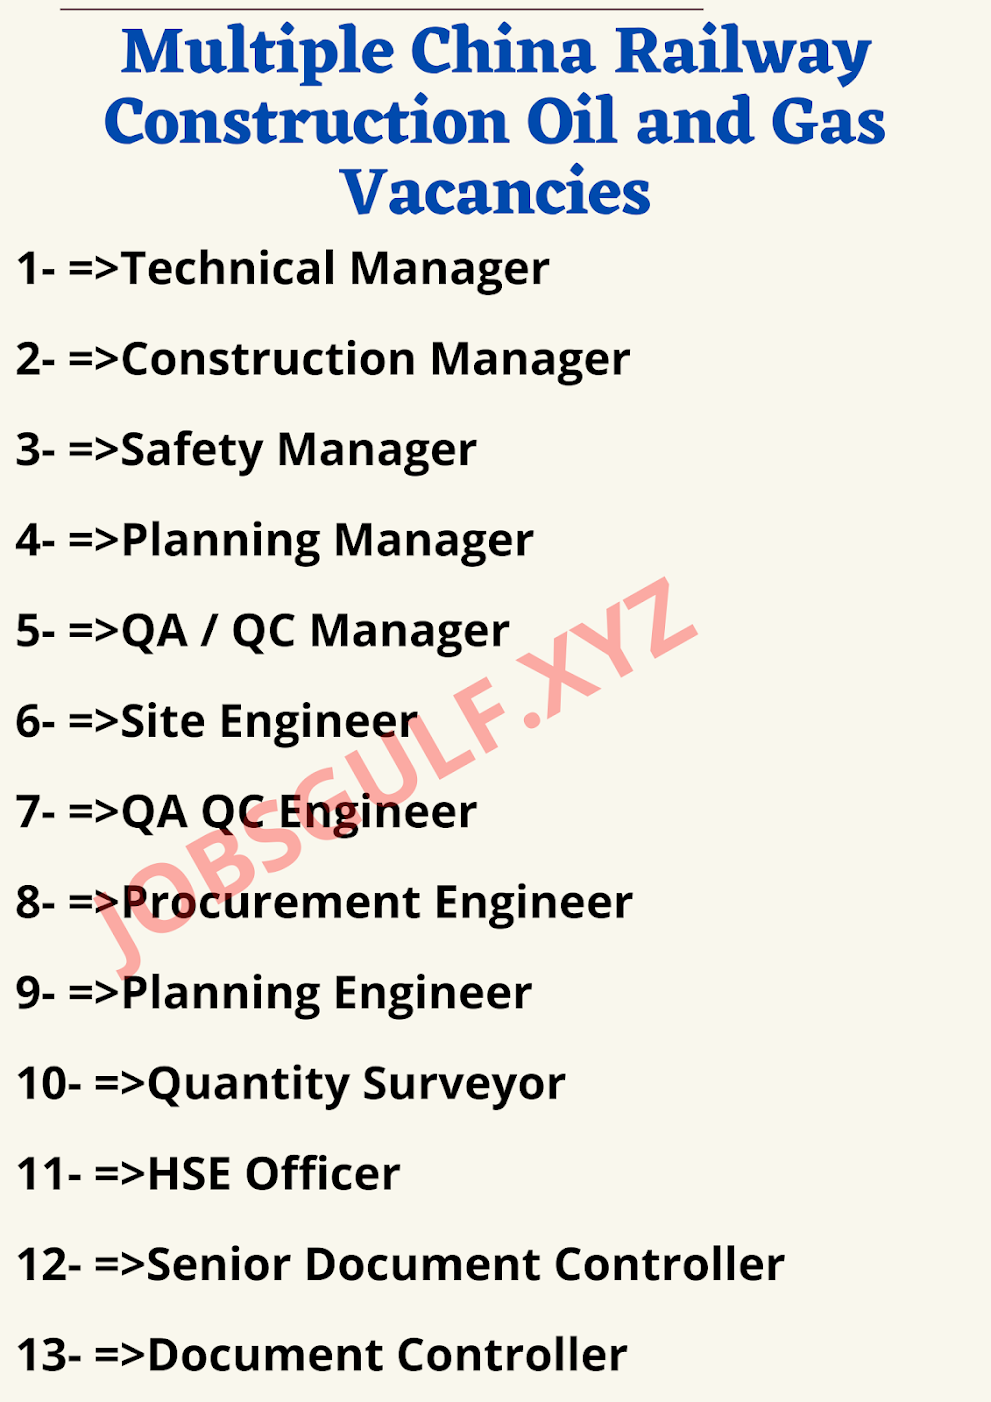 Multiple China Railway Construction Oil and Gas Vacancies